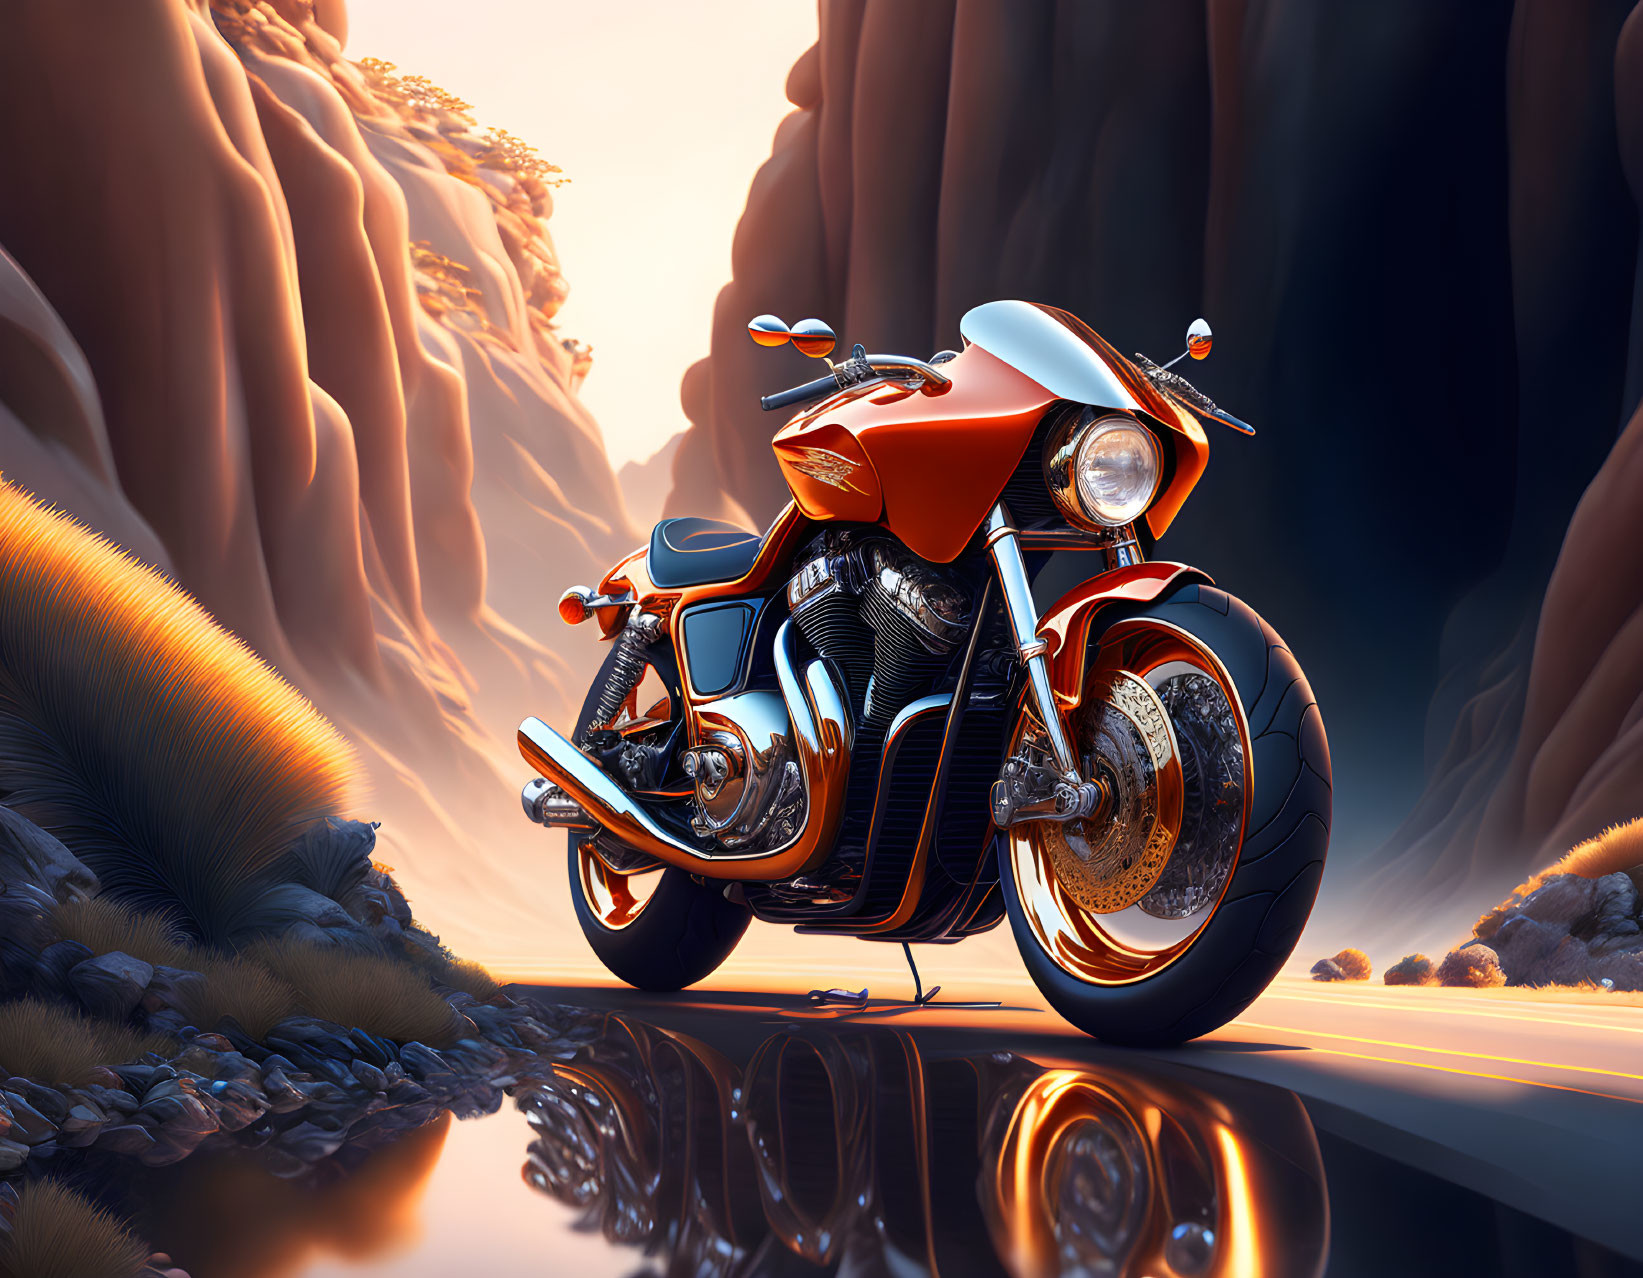 Orange Motorcycle Parked Among Rock Formations on Reflective Surface